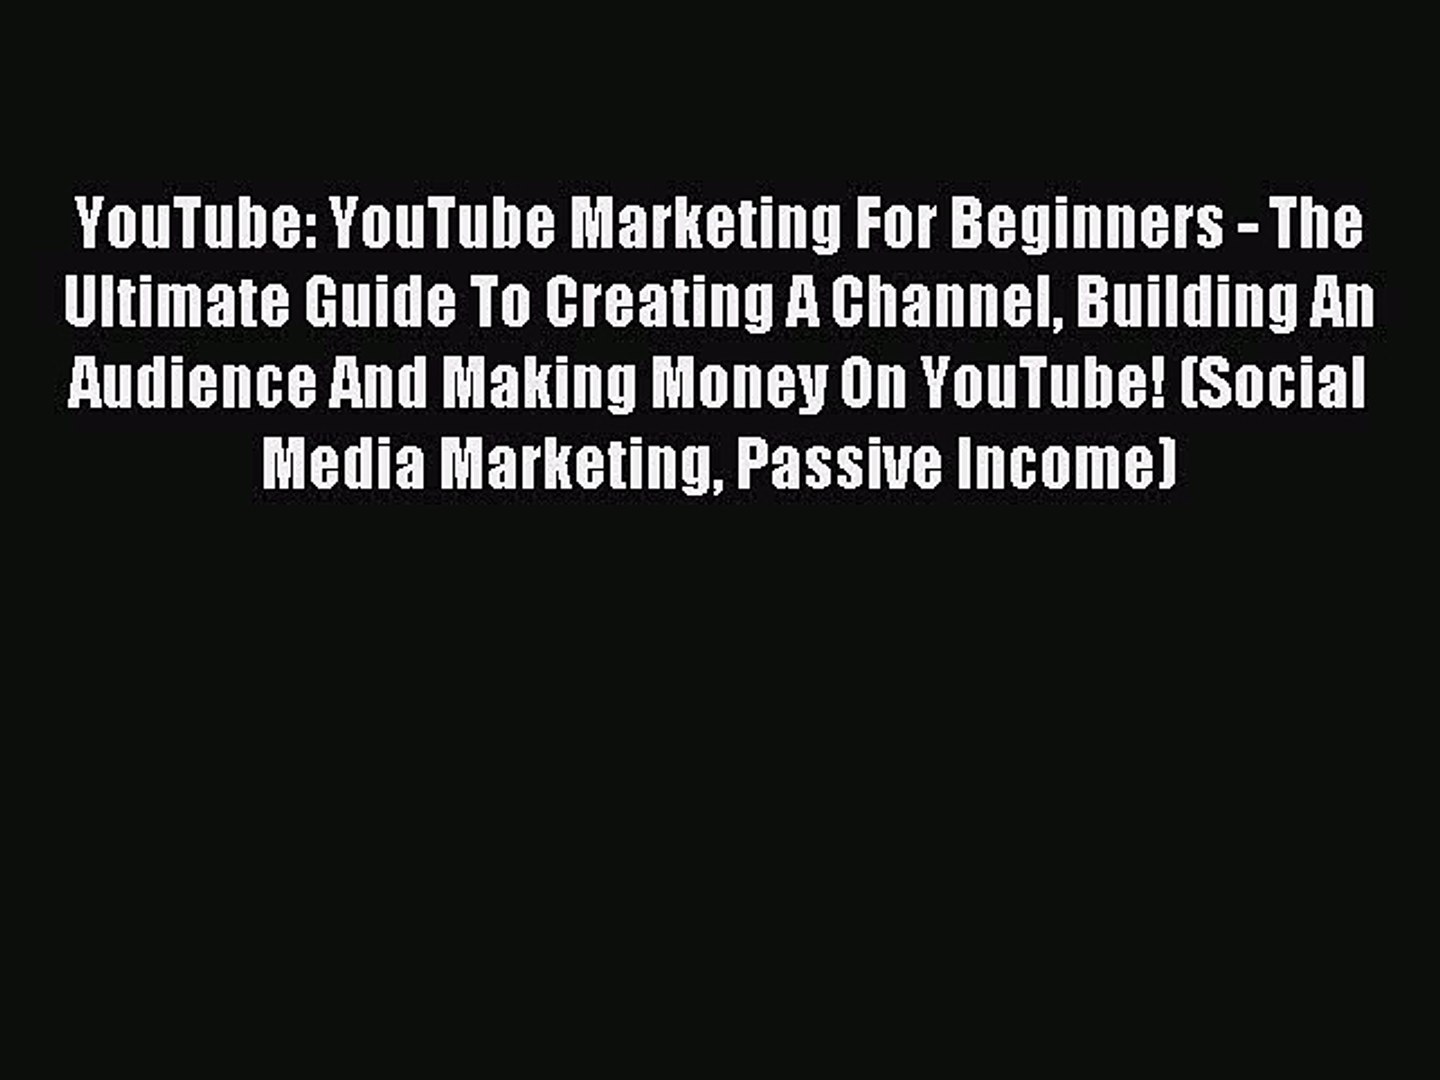 Professional Youtube Marketing Guide 2021 to Rank Higher